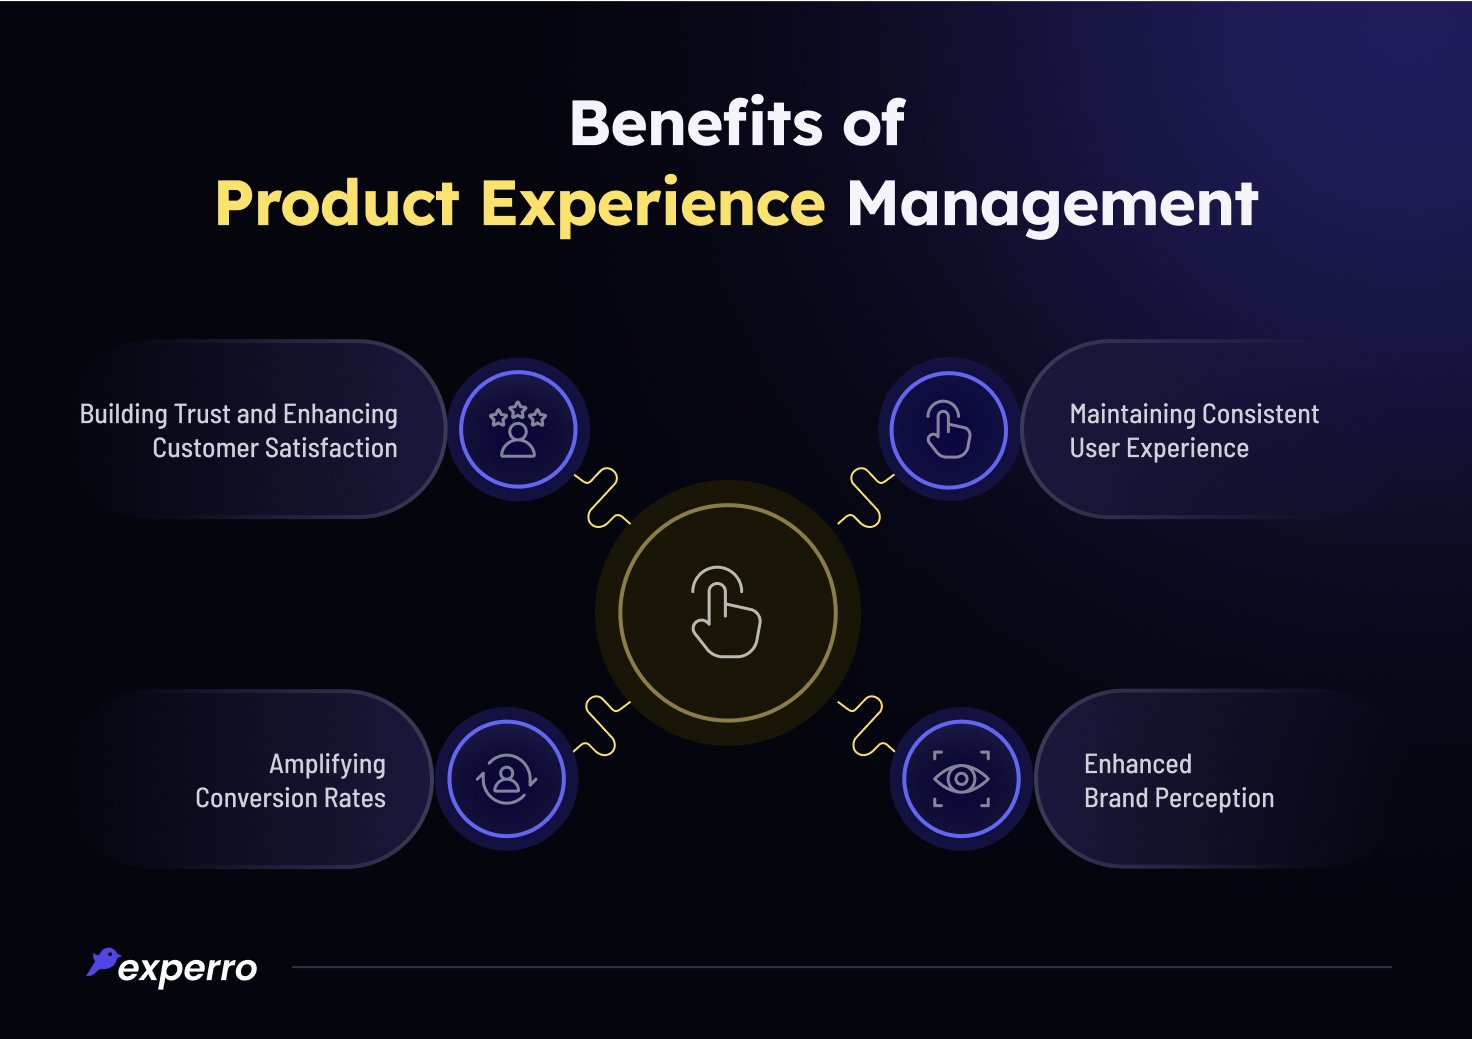 Benefits of Product Experience Management